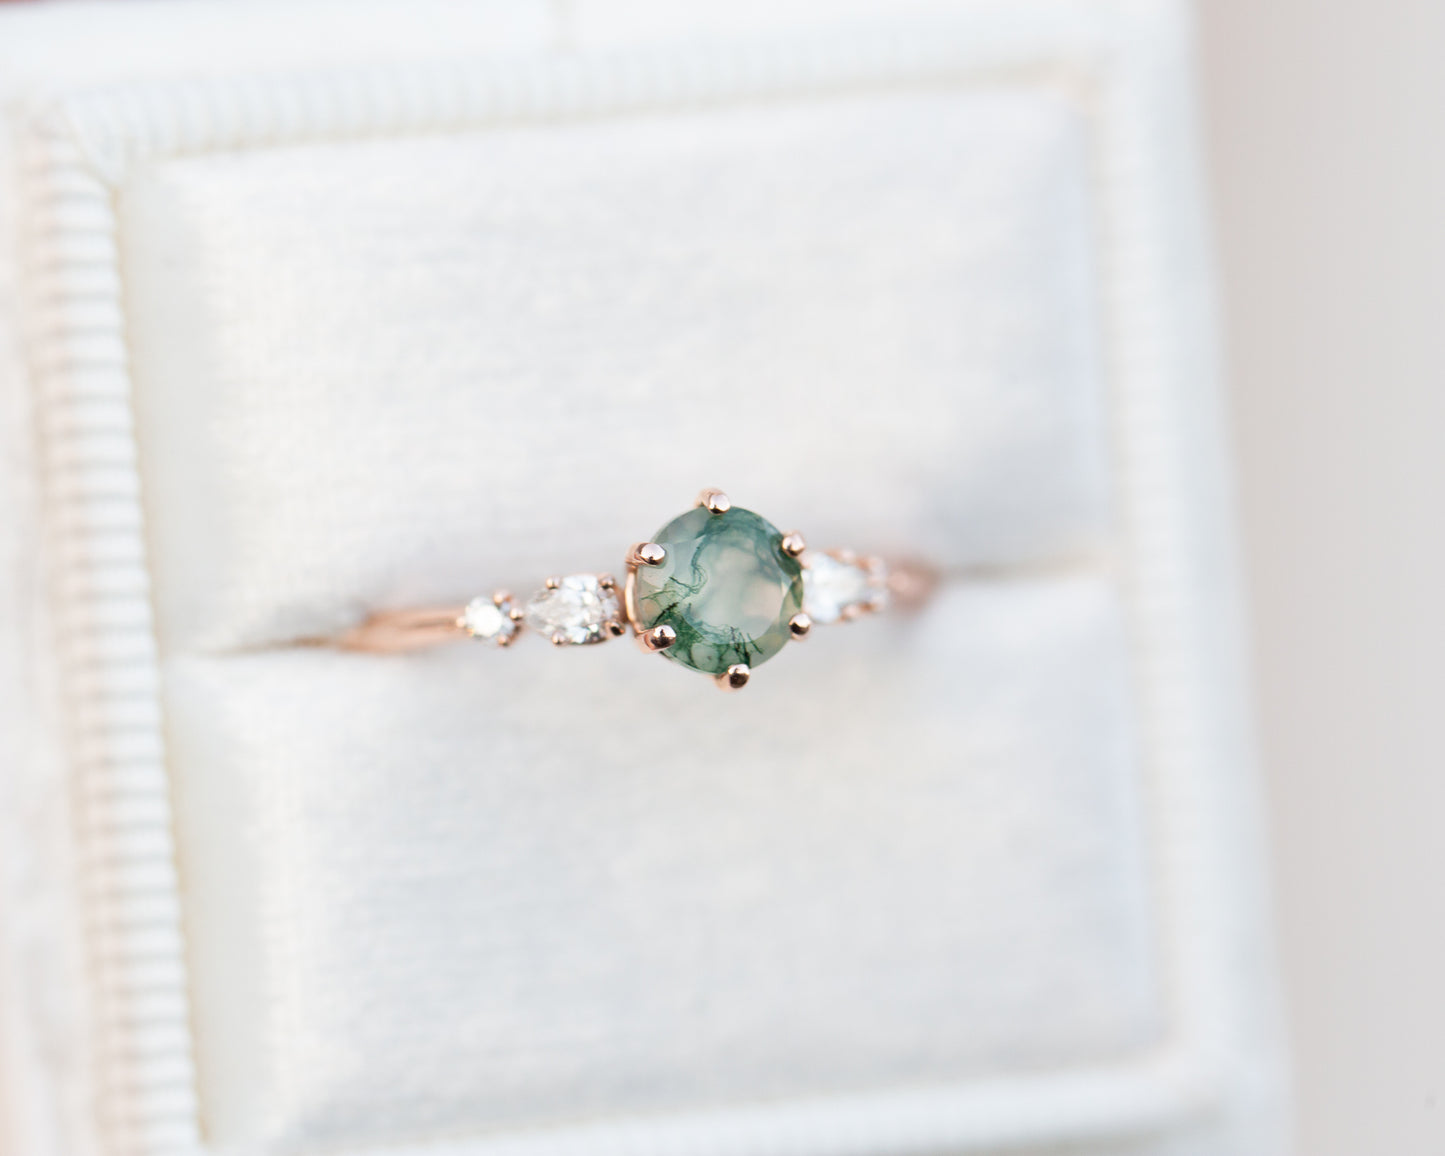 Round moss agate five stone ring with diamond side stones